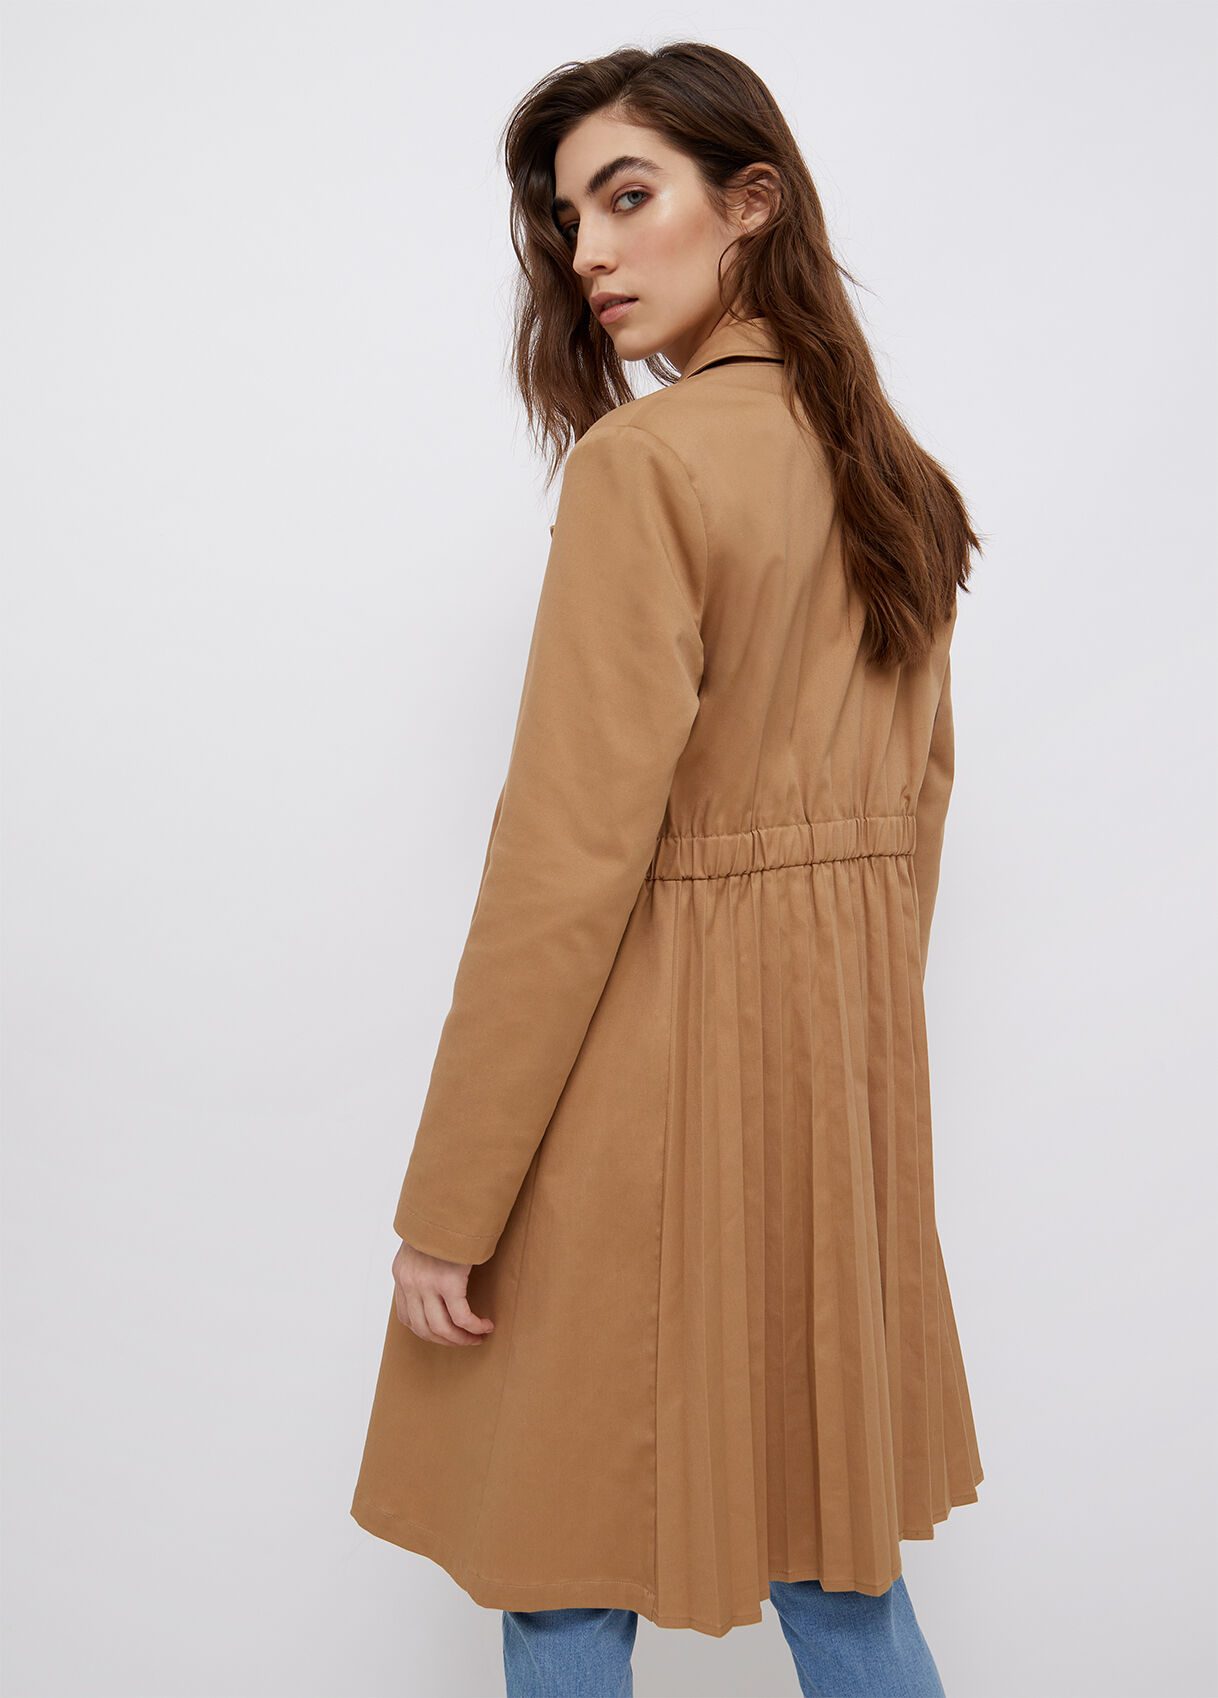 Trench coat with pleats on the back